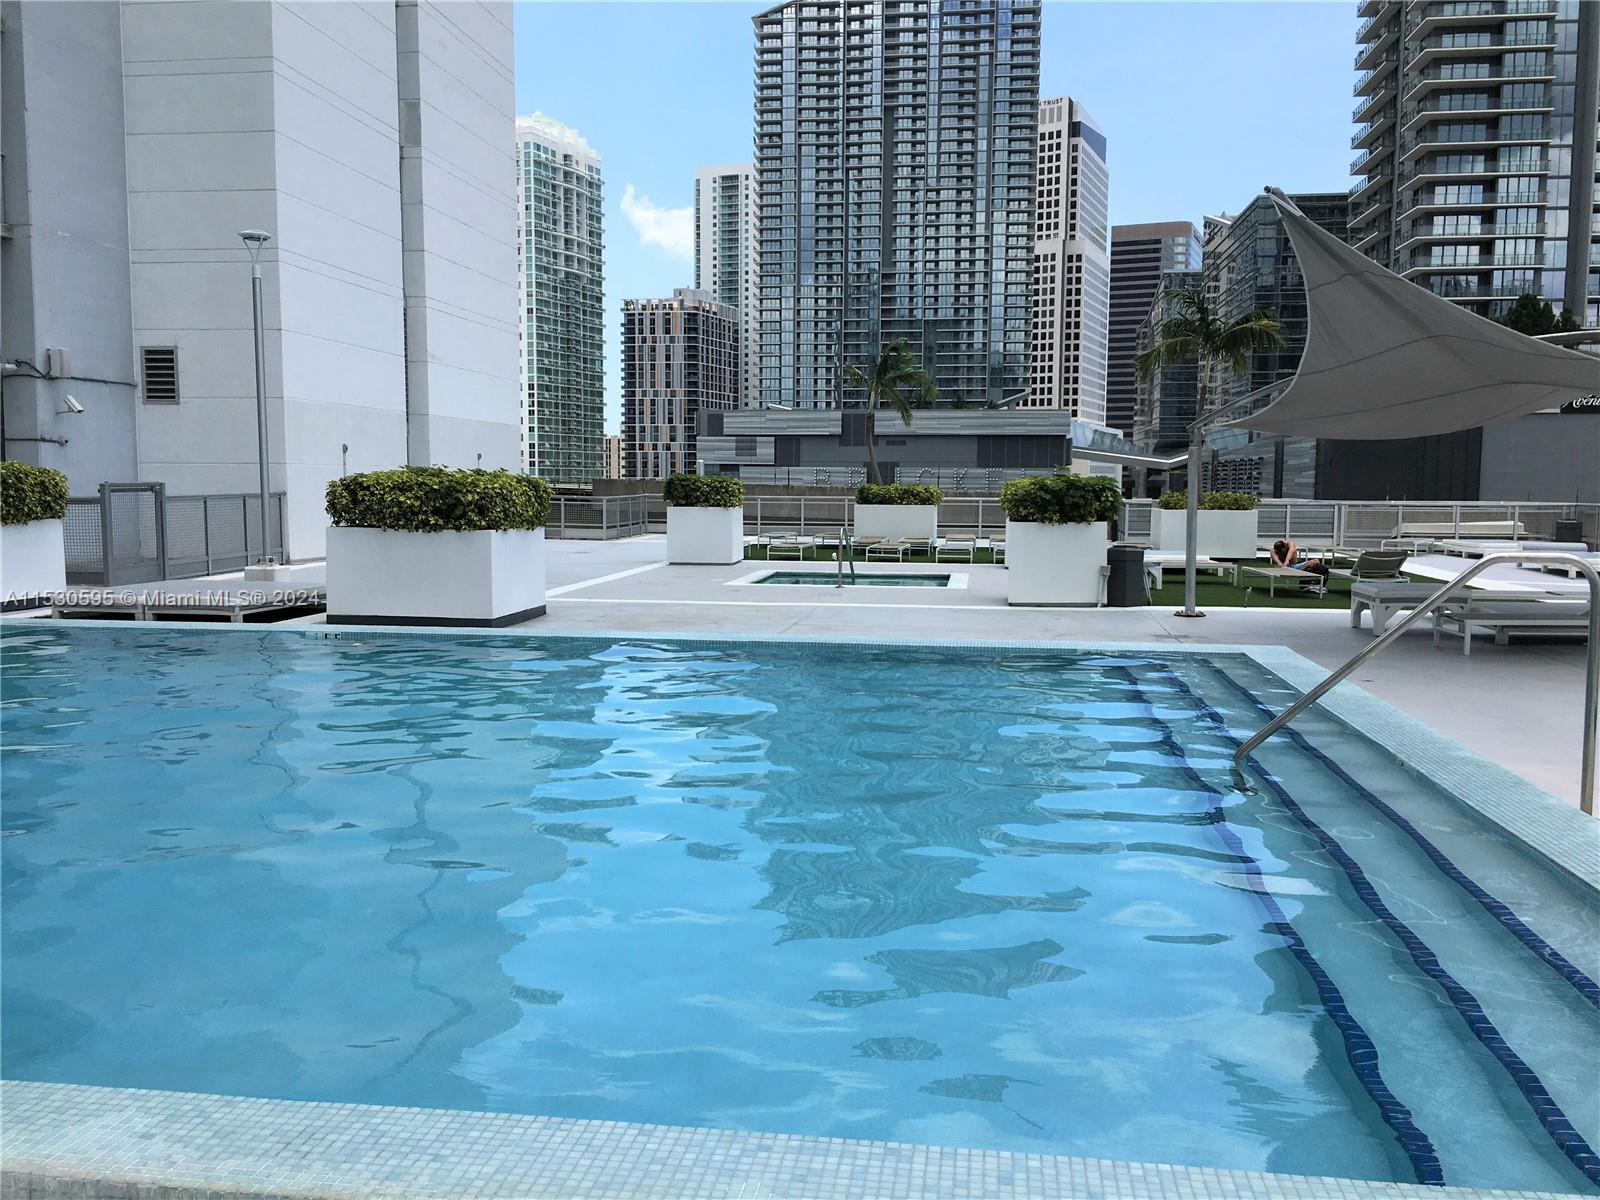 Brand new Electric stove and fridge will be install after tenant moves in.Brickell! Riverfront building located half block from Brickell City Center, Mary Brickell, Metrorail & Metromover, Miami water taxi, supermarkets, restaurants, bars, shops, movie theaters. 21st floor unit with 170 sq ft balcony overlooking the pool and city. This modern 1 bedroom unit has white appliances, granite countertops; washer and dryer inside. The bedroom is divided by a floor to ceiling Glass walls and a sliding door partition.On the 8th floor is a 49,000 square foot oasis offering a pool, gym, poolside cabanas, volcanic rock sauna, racquetball courts, rooftop lounge, concierge services. Security, 24 hour valet service, assigned parking space . Year lease only. No Pets allowed in the building for tenant's .